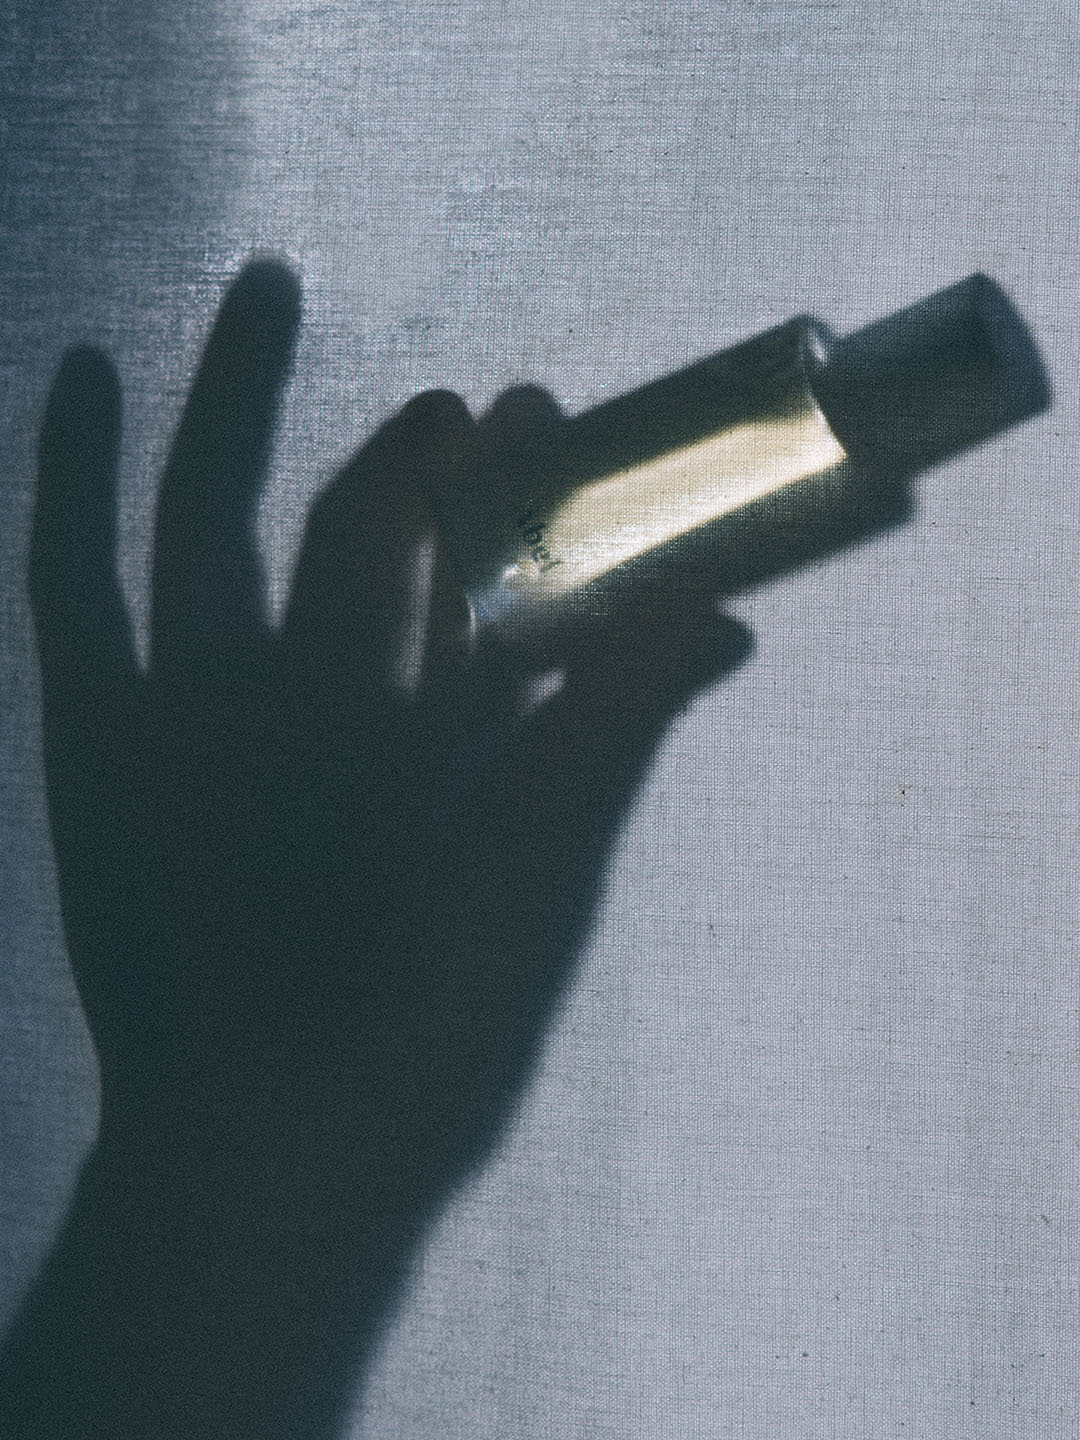 A natural shadow of a hand holding a Cobalt Amber perfume bottle with an Abel brand amber hue.